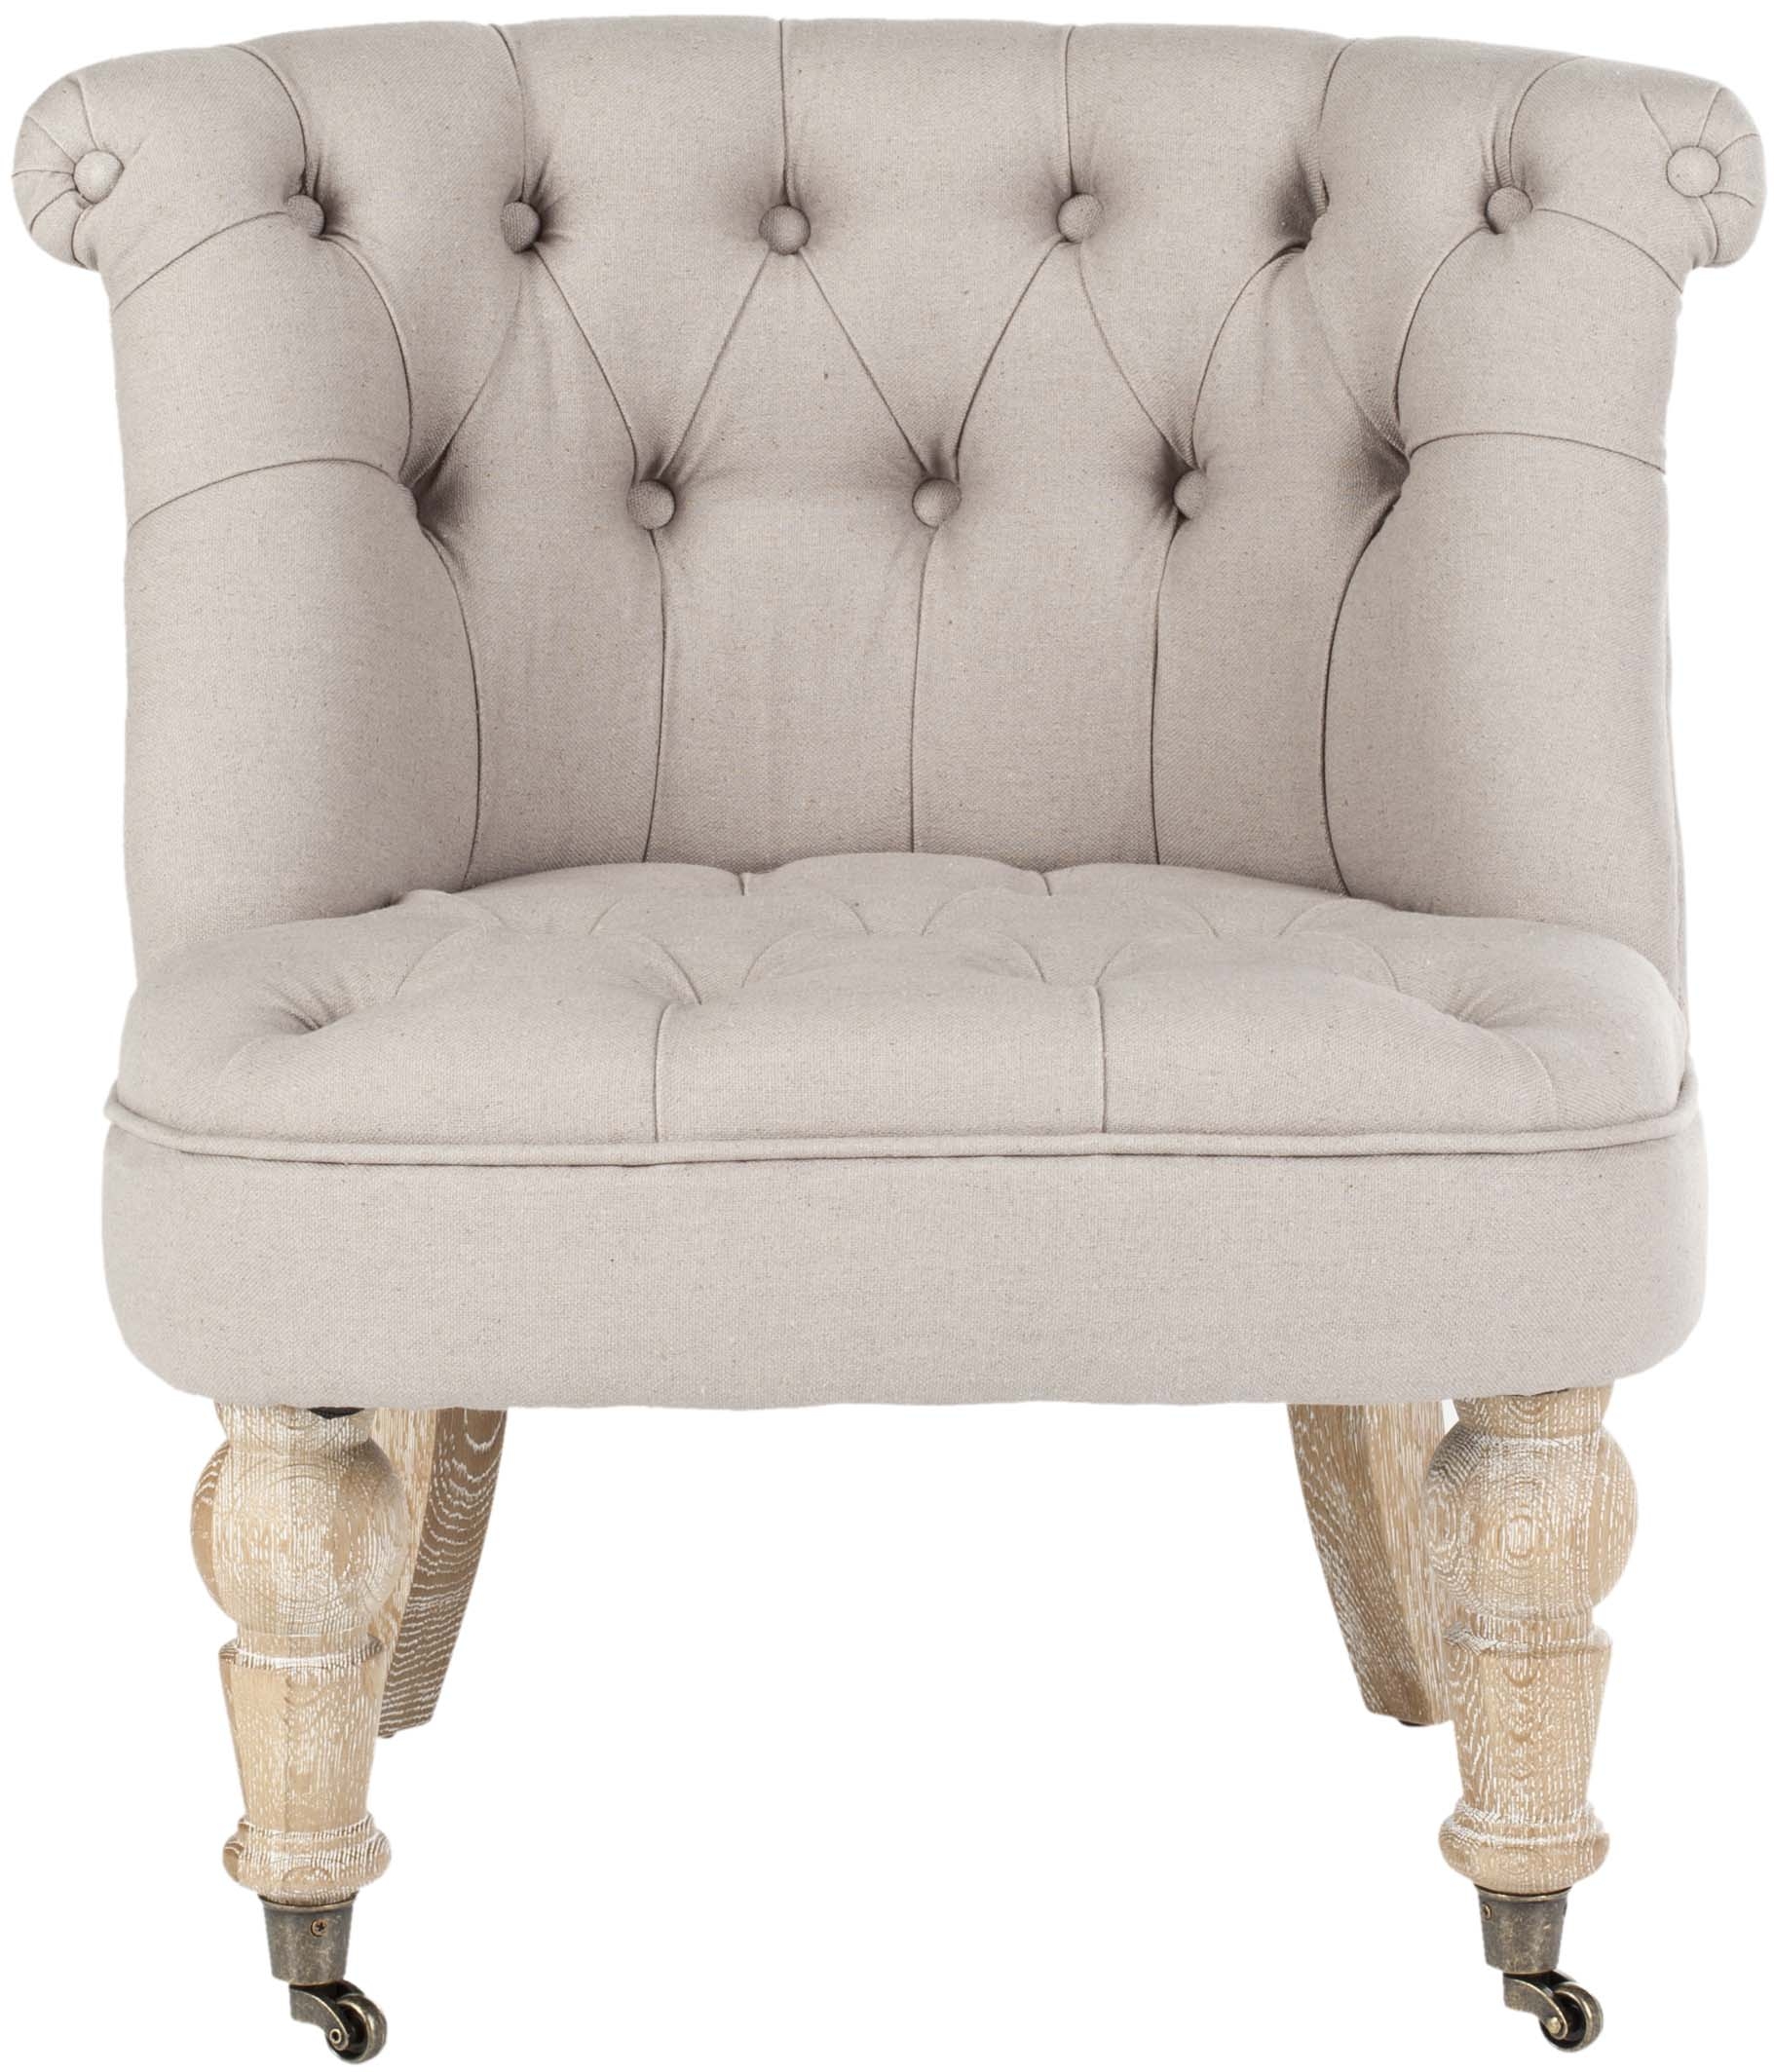 Baby Tufted Chair - Taupe/White Wash - Arlo Home - Image 0